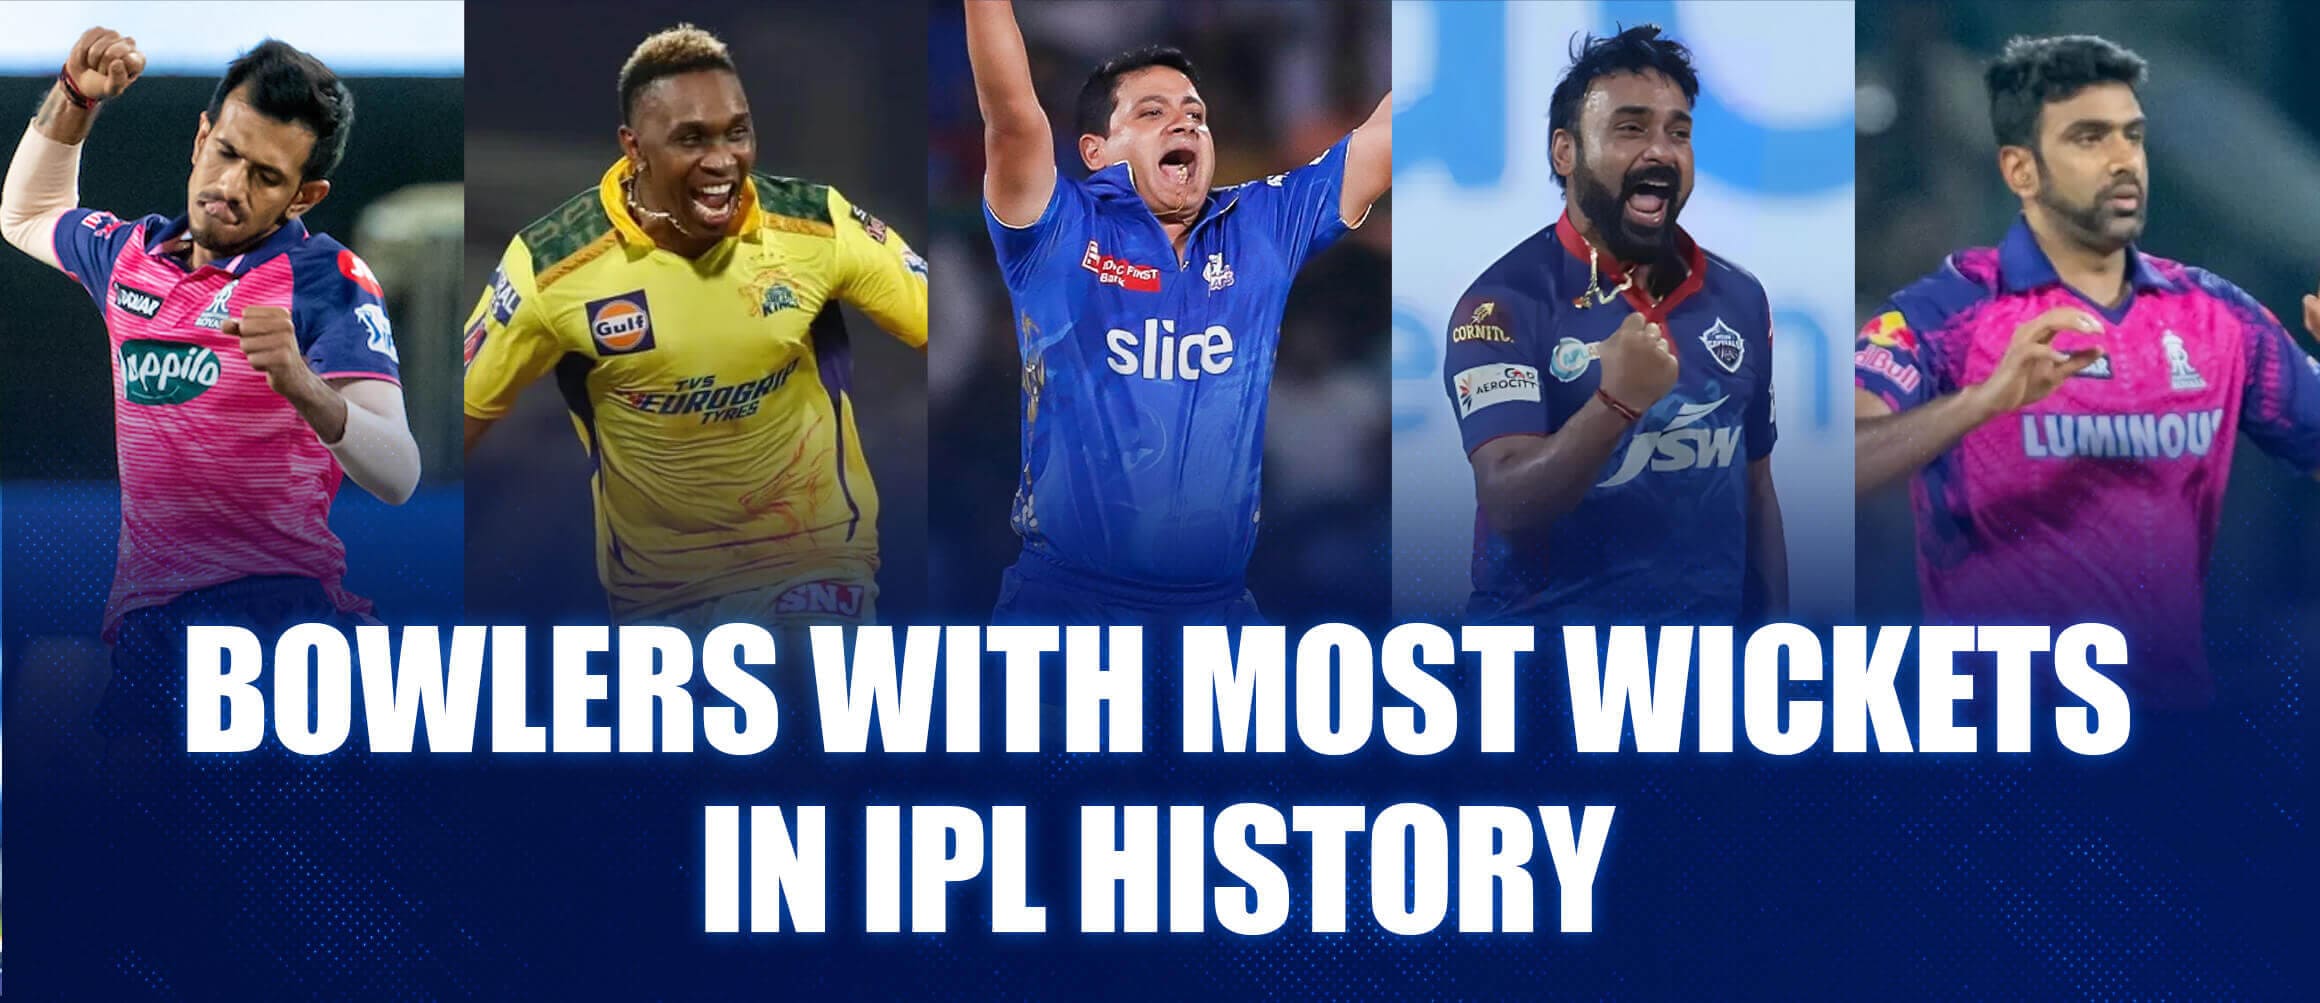 Bowlers with Most Wickets in IPL History